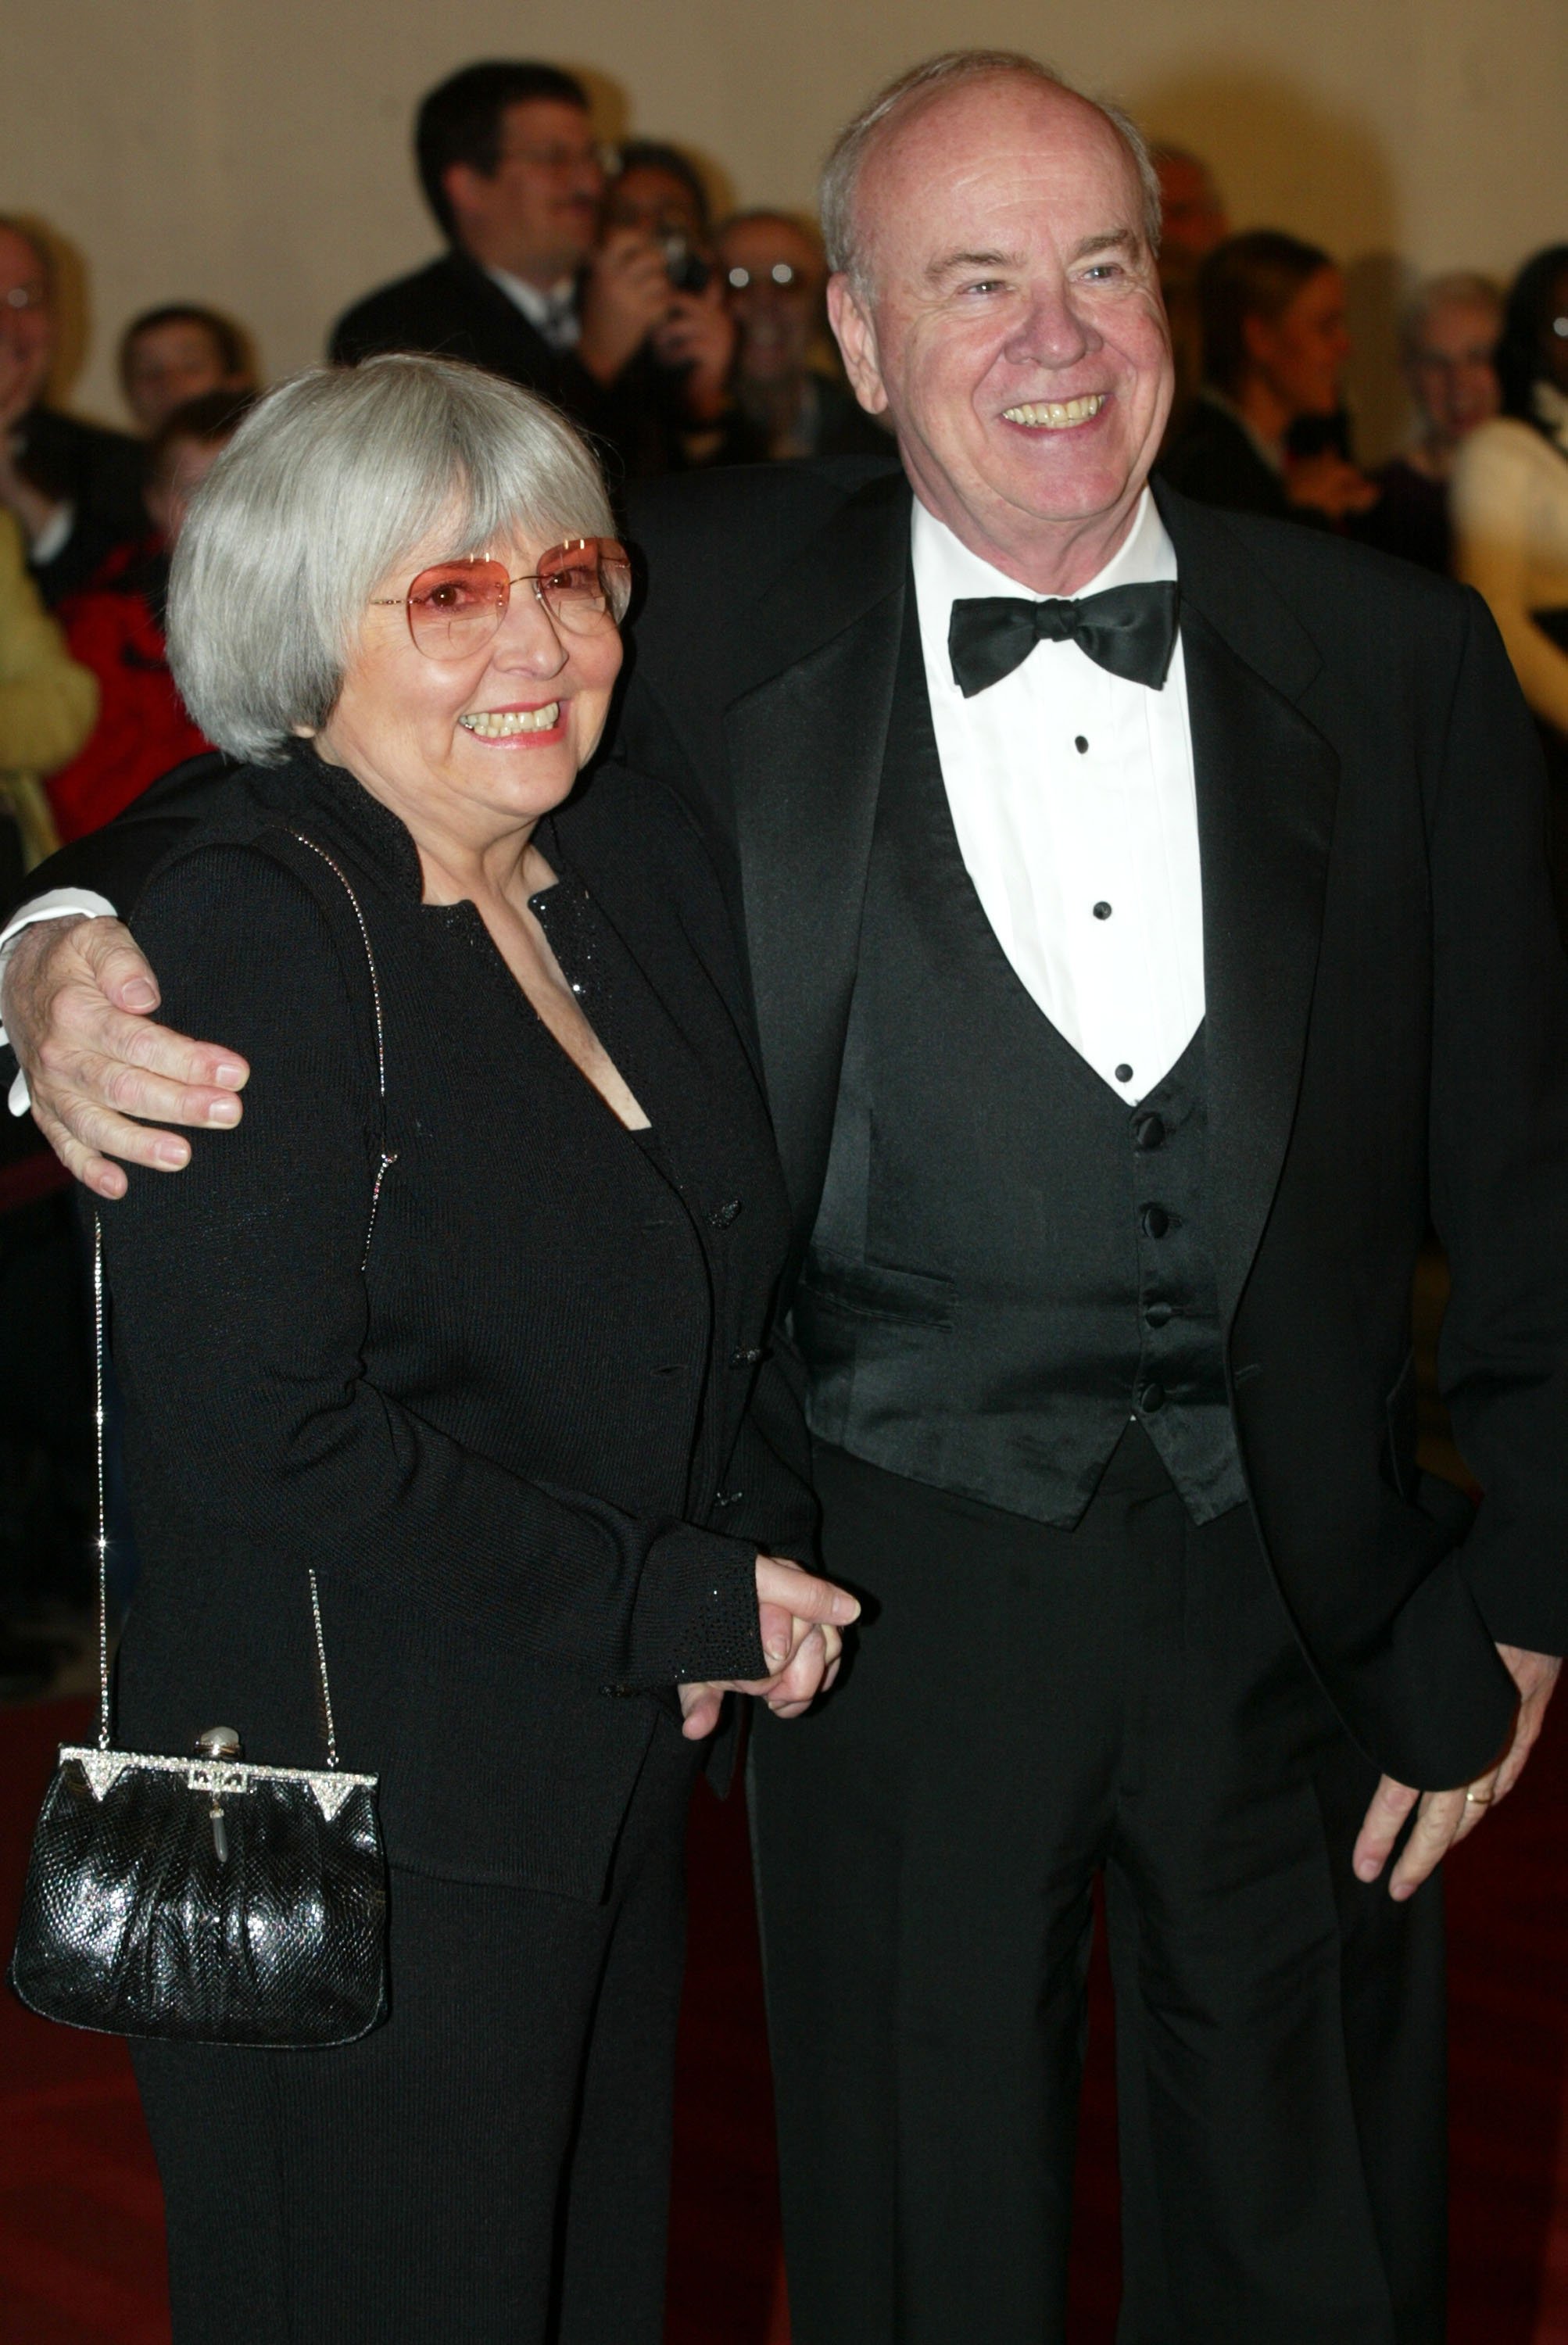 Tim Conway and his wife Charlene at the 5th Annual Kennedy Center Mark Twain Prize presentation ceremony October 29, 2002 | Source: Getty Images